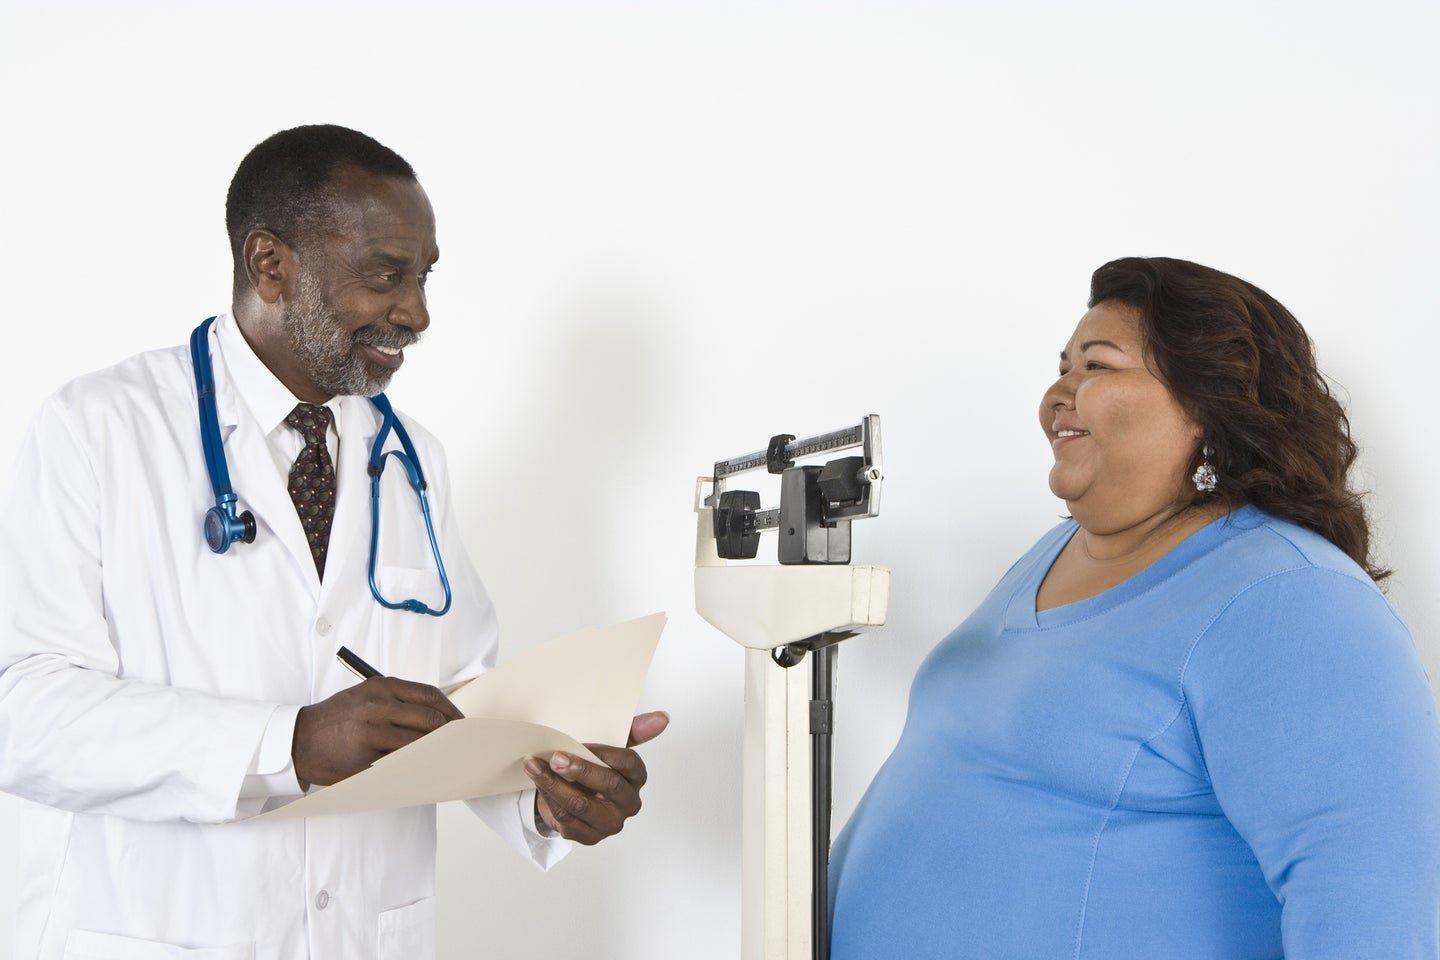 Doctors need to change the way they treat obesity